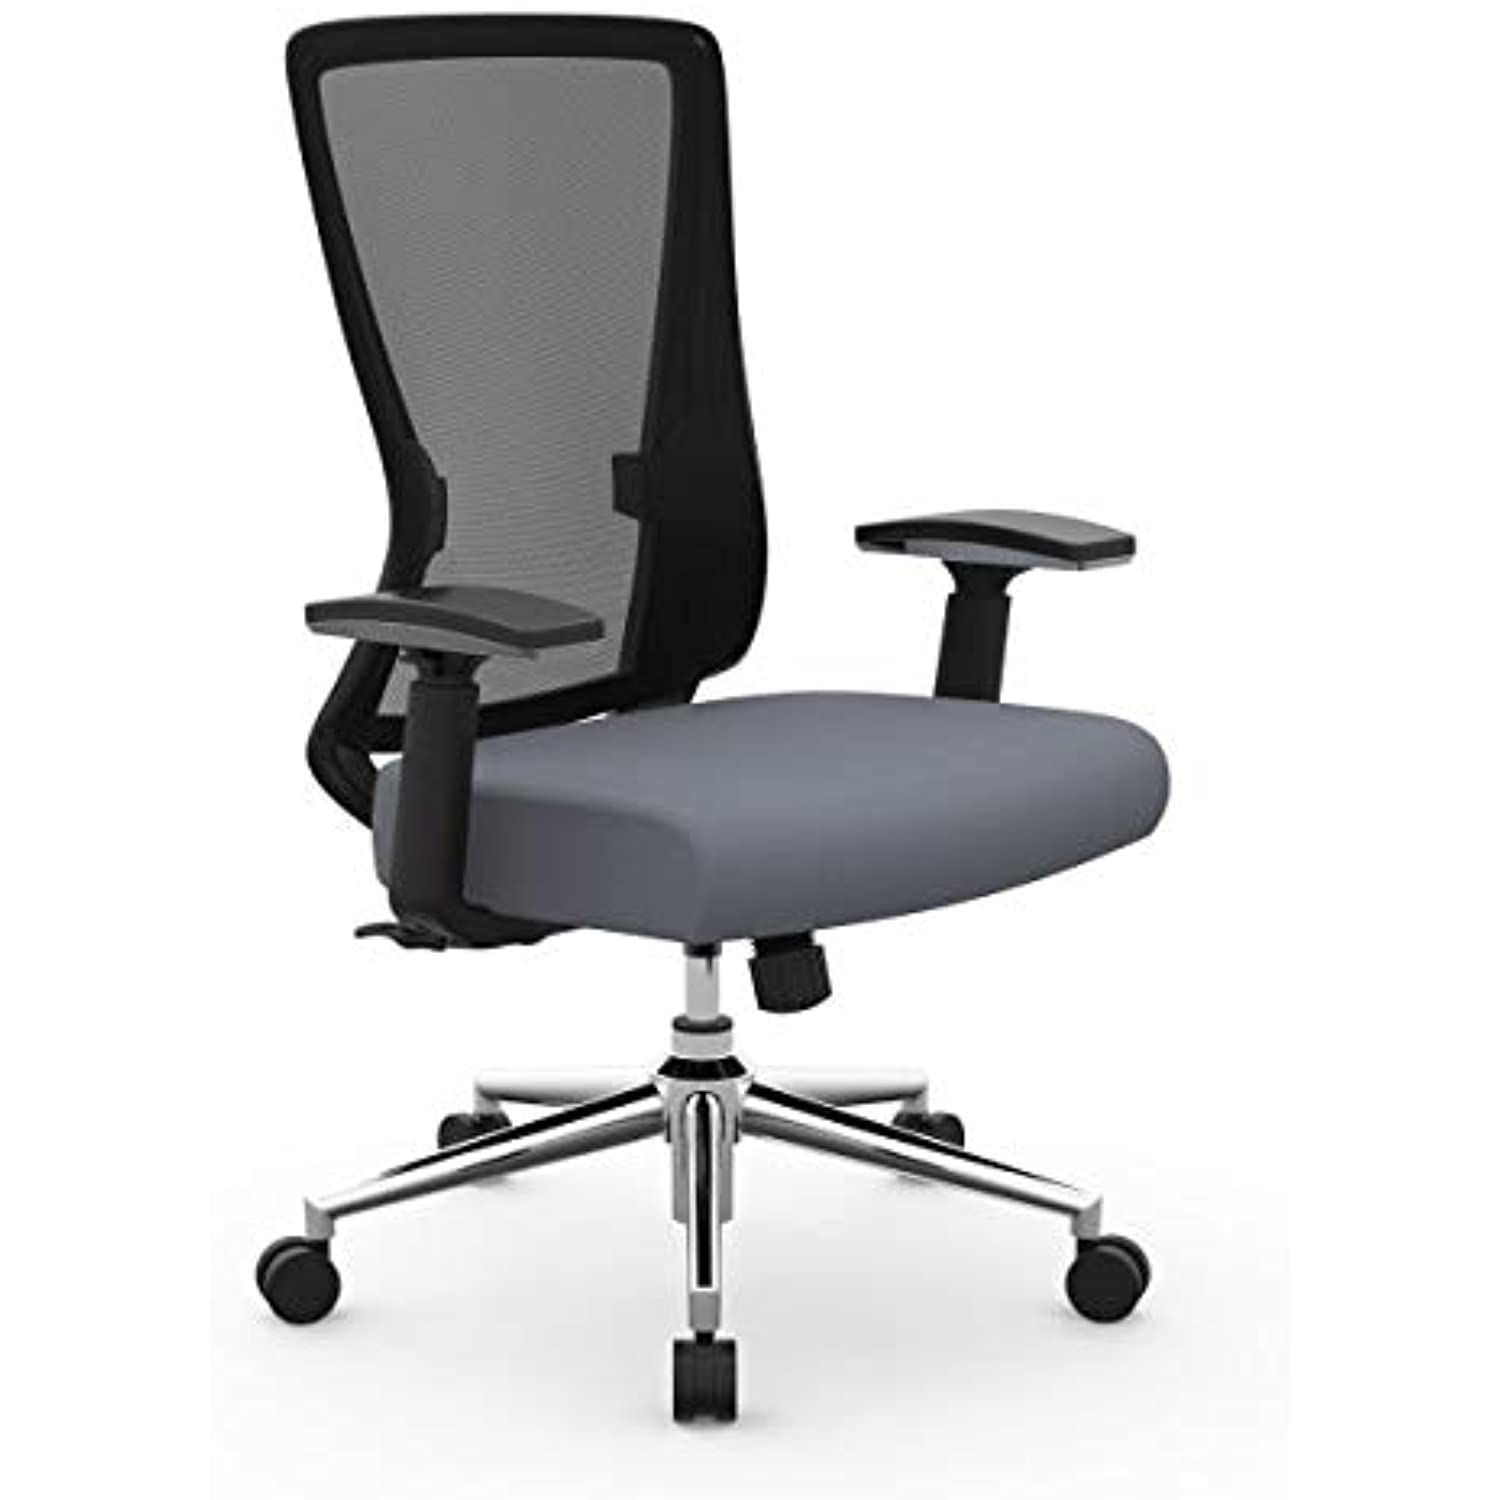 Realspace Levari Faux Leather Mid-Back Task Chair, Gray/Black - image 1 of 8